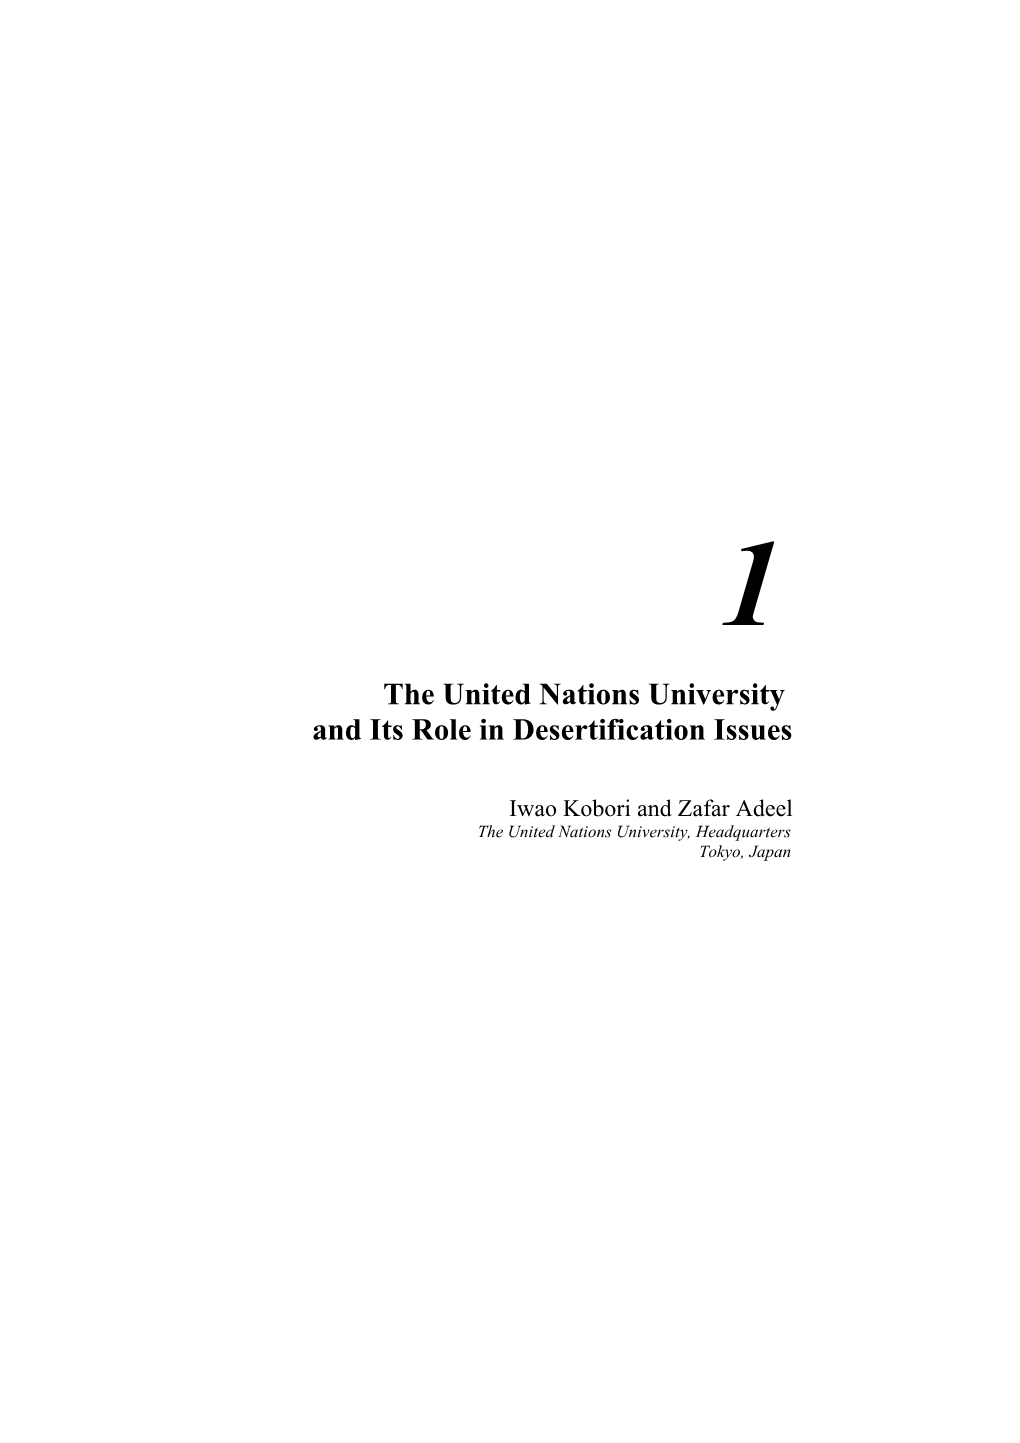 The United Nations University and Its Role in Desertification Issues